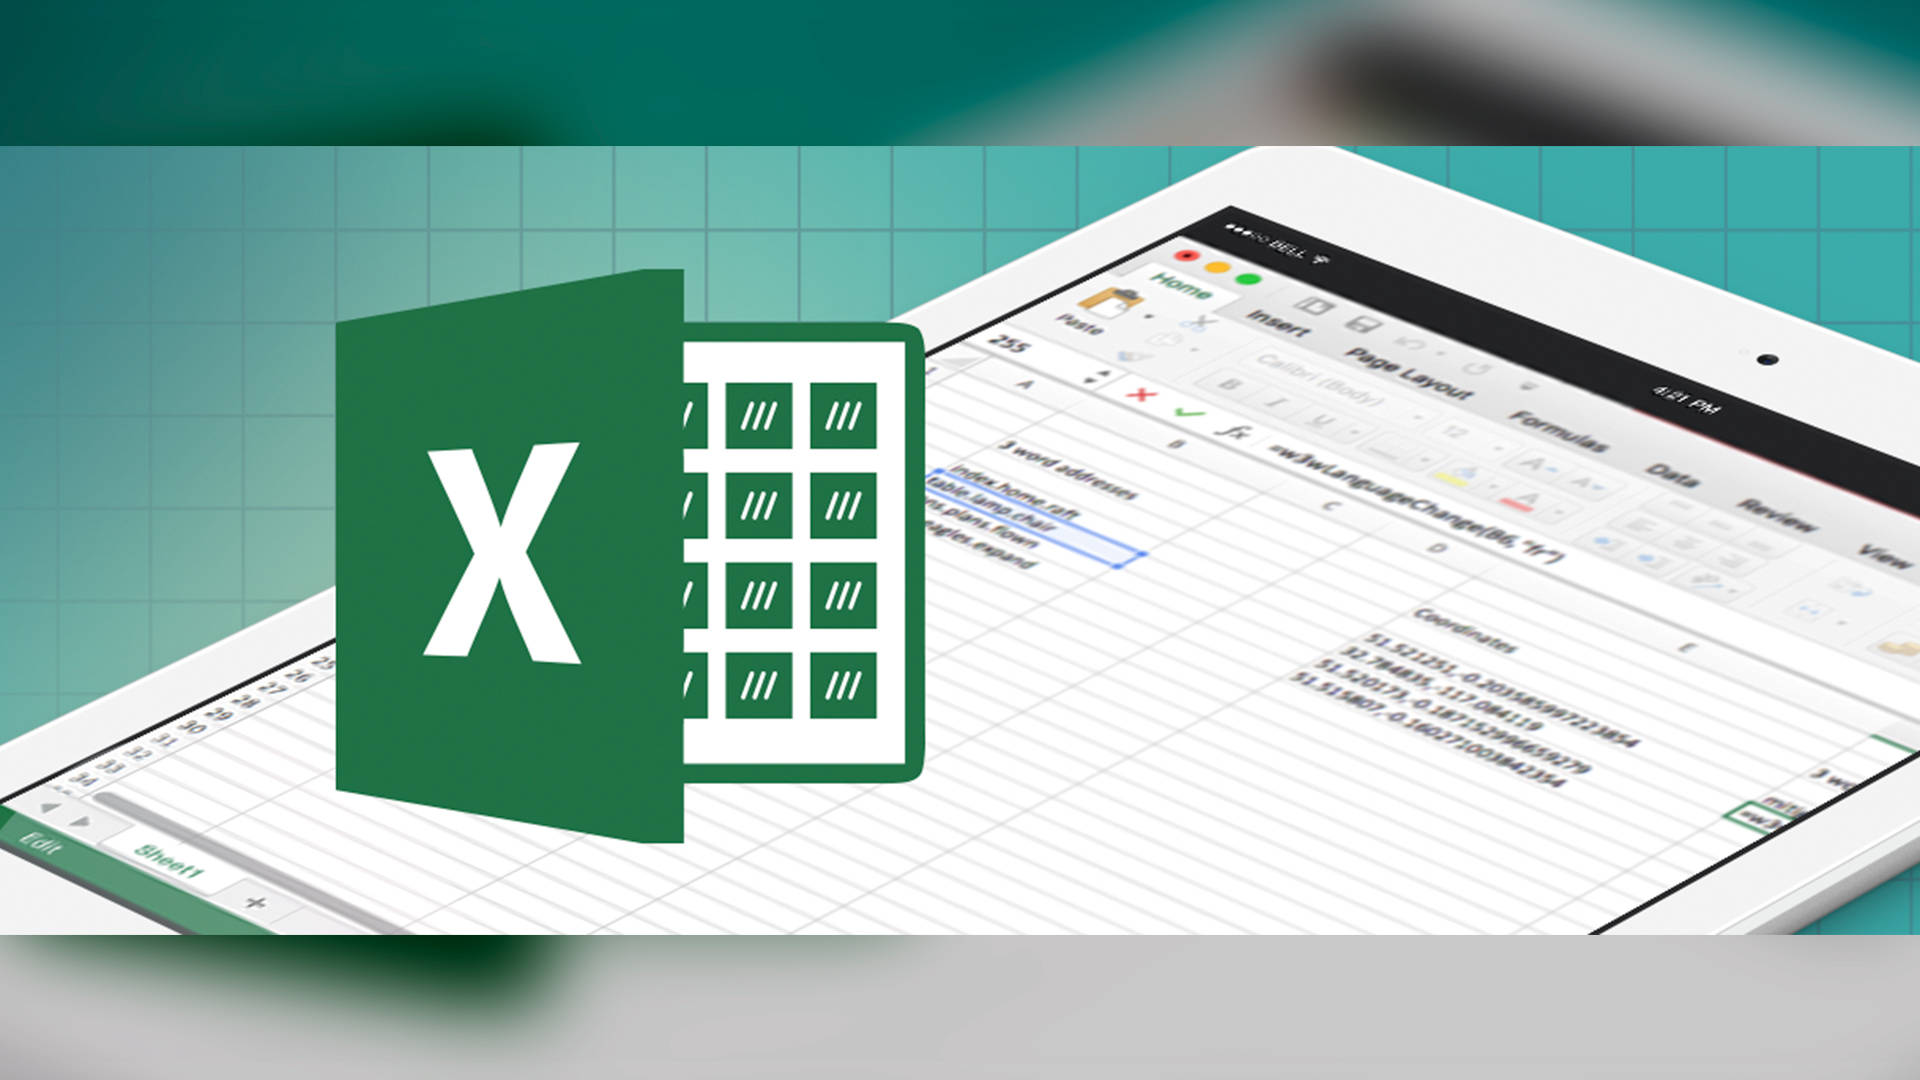 Excel Spreadsheet Application On Tablet Background